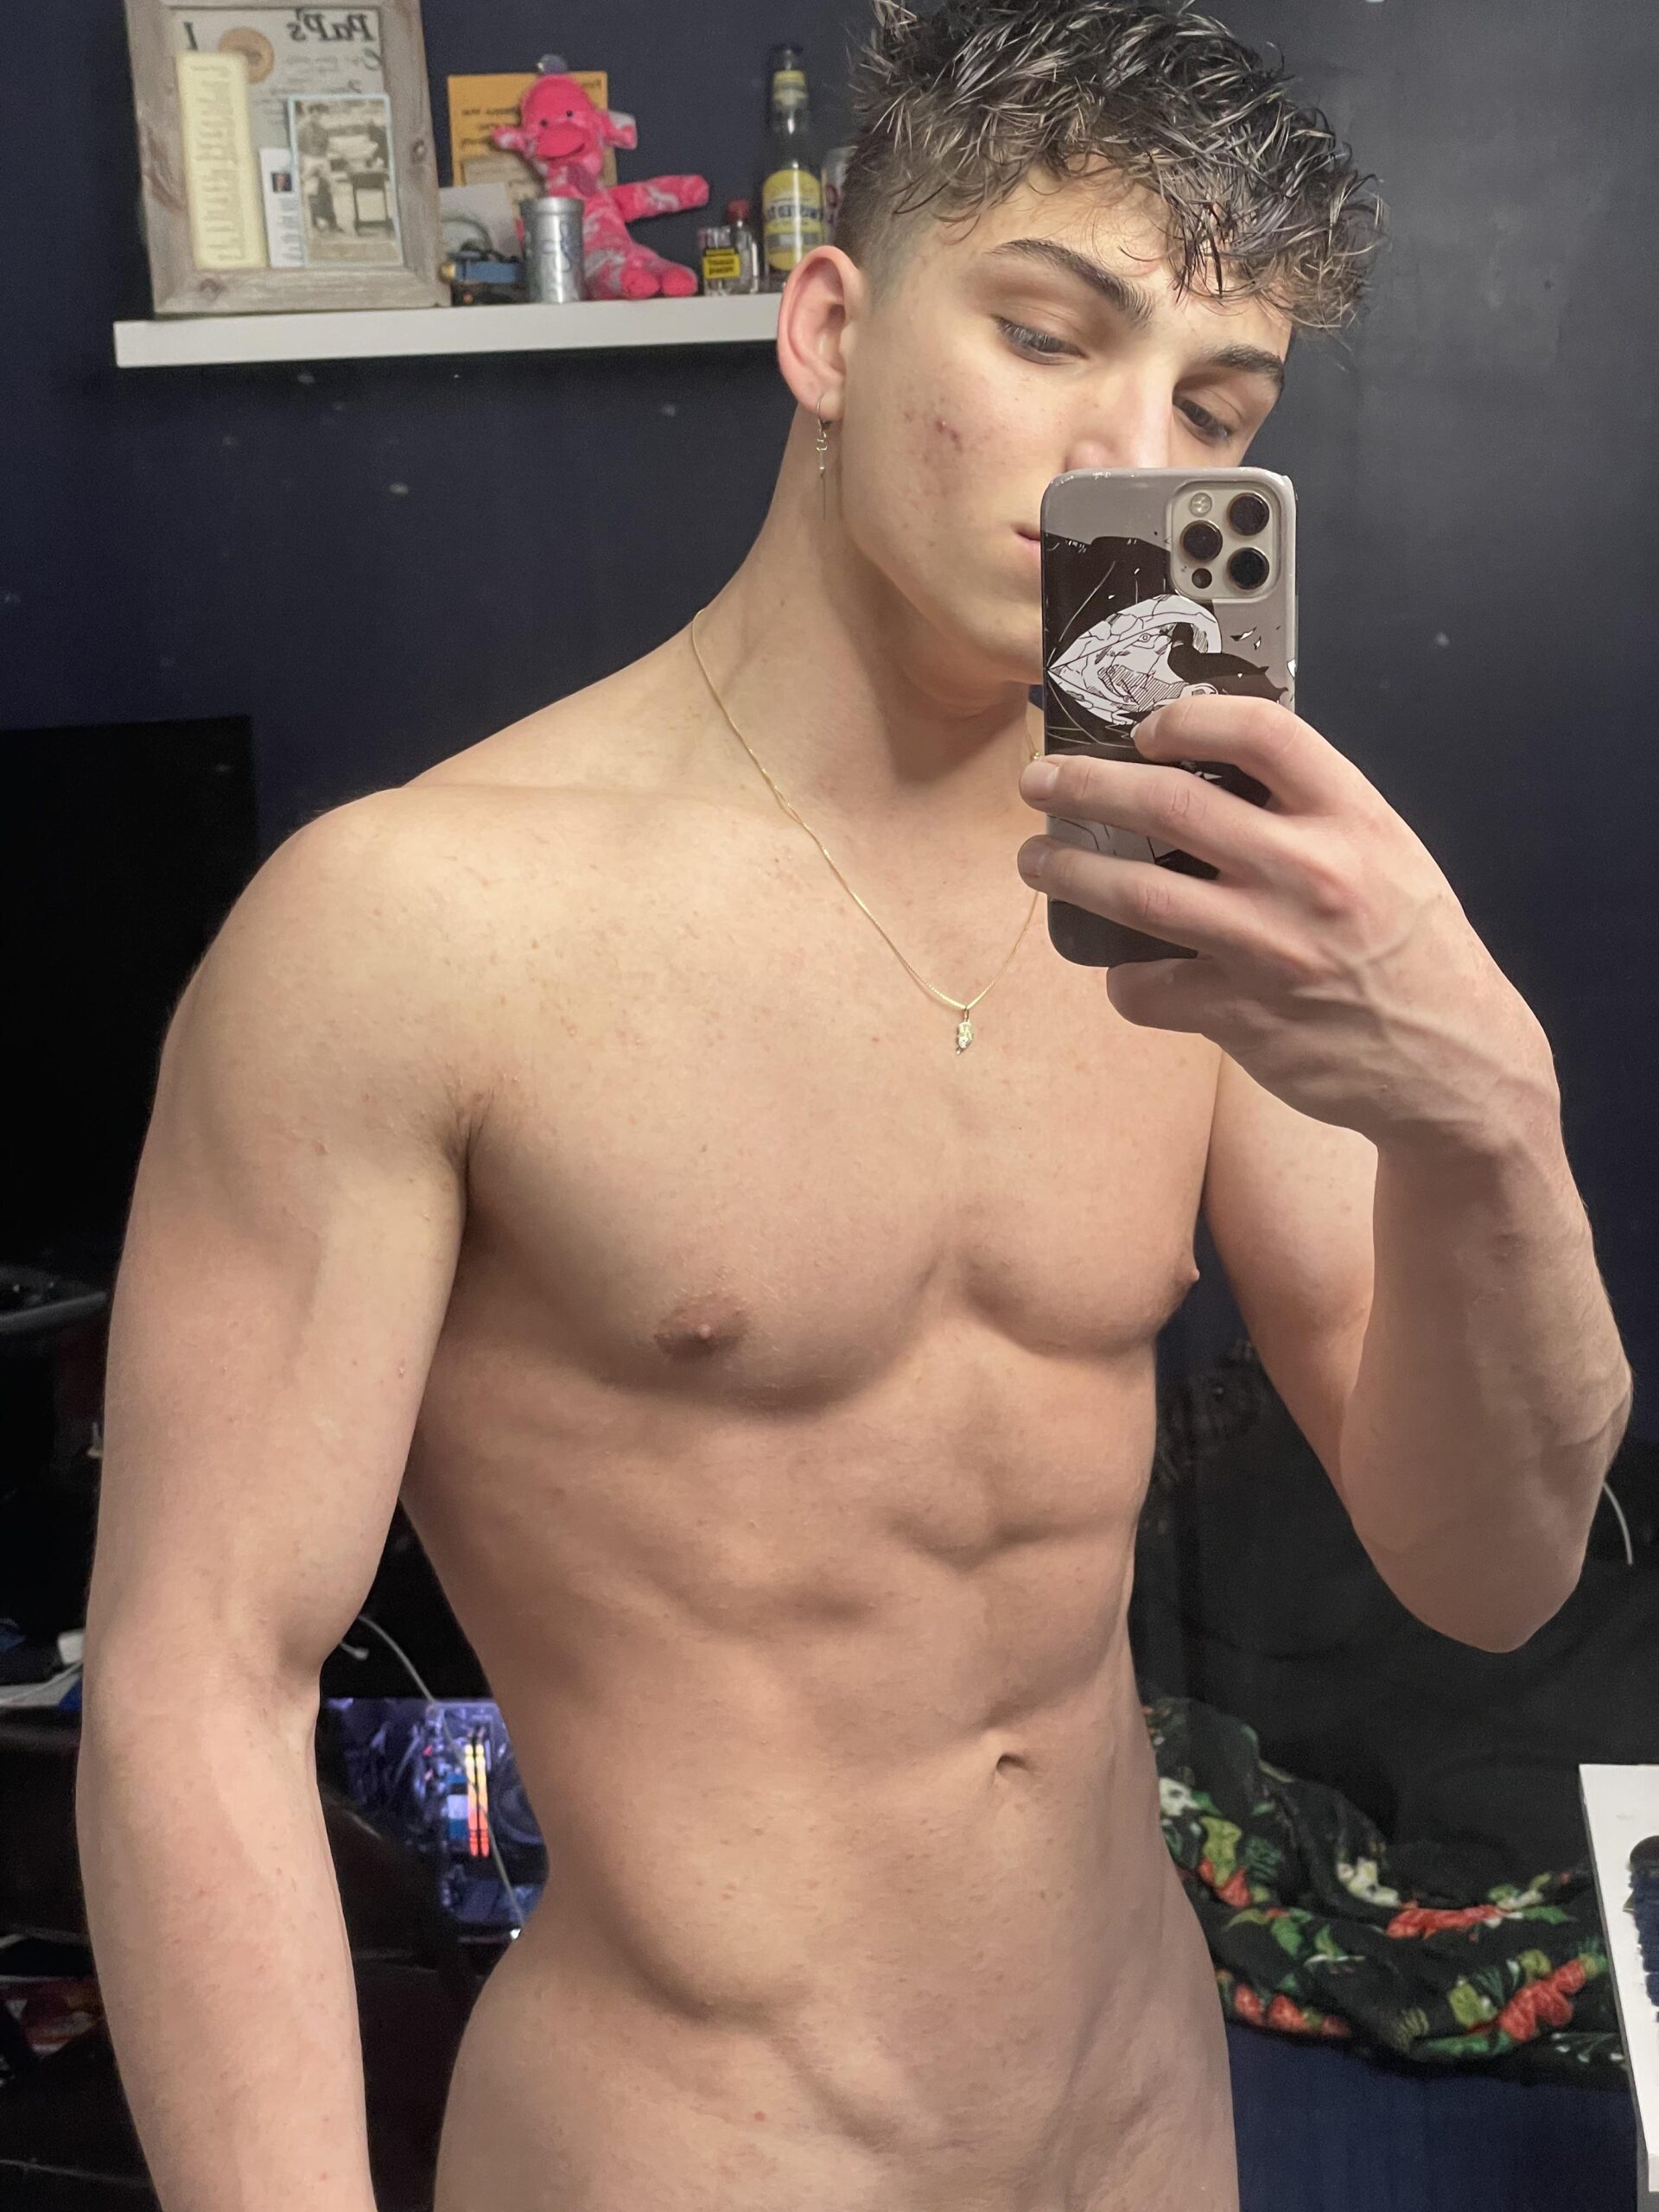 Explore the sensual world of tristan diaz on onlyfans